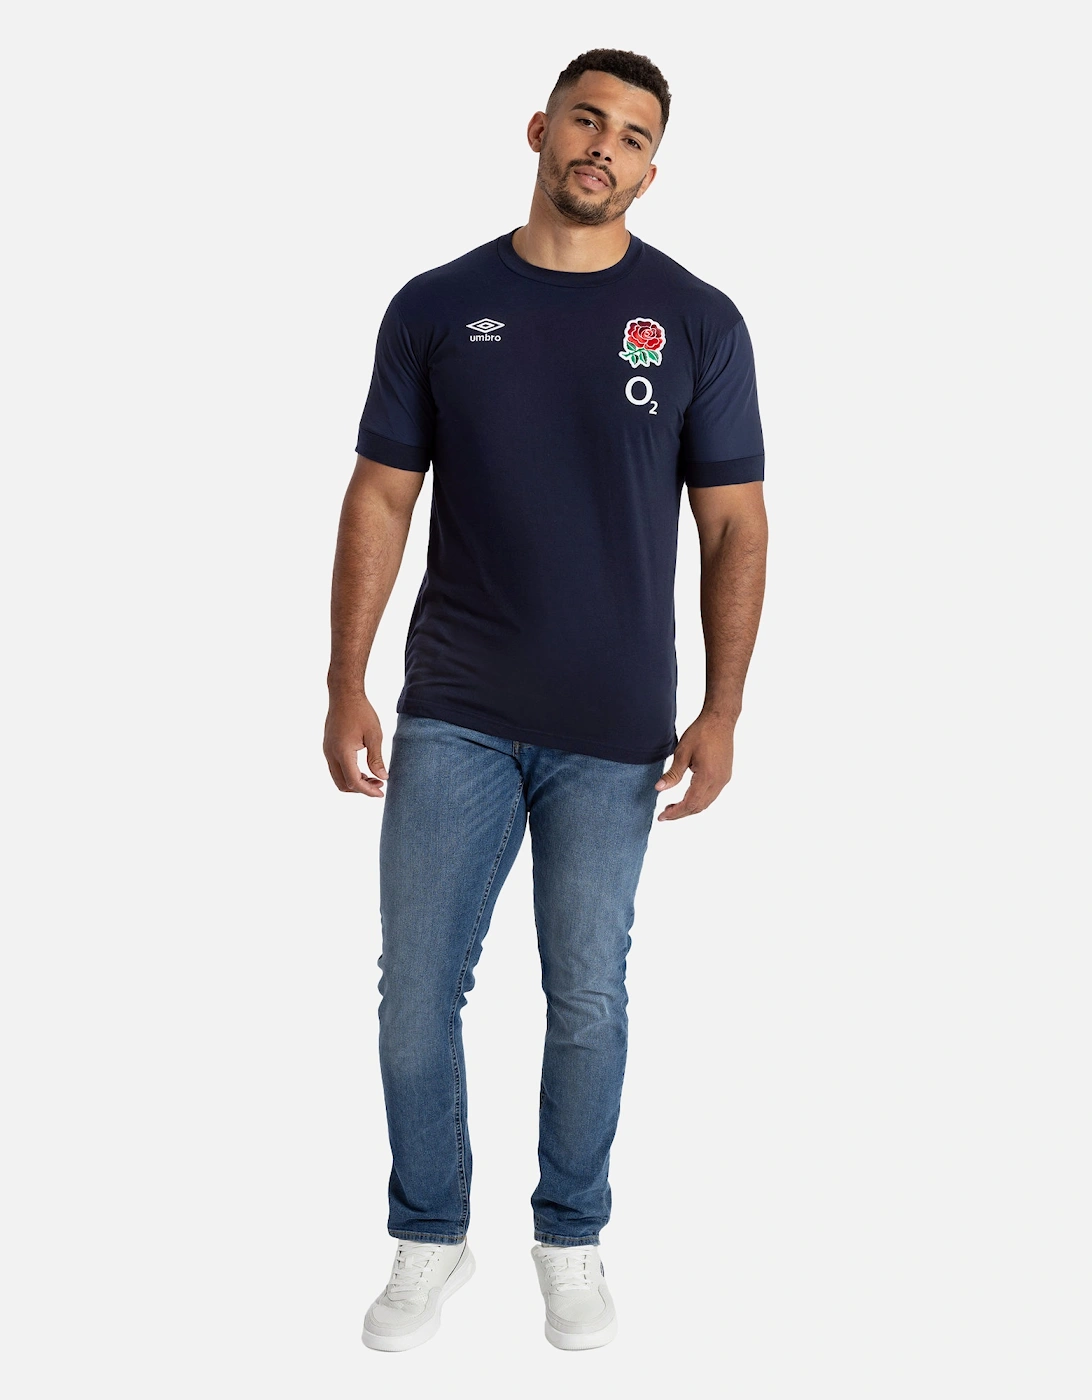 Mens 23/24 England Rugby T-Shirt